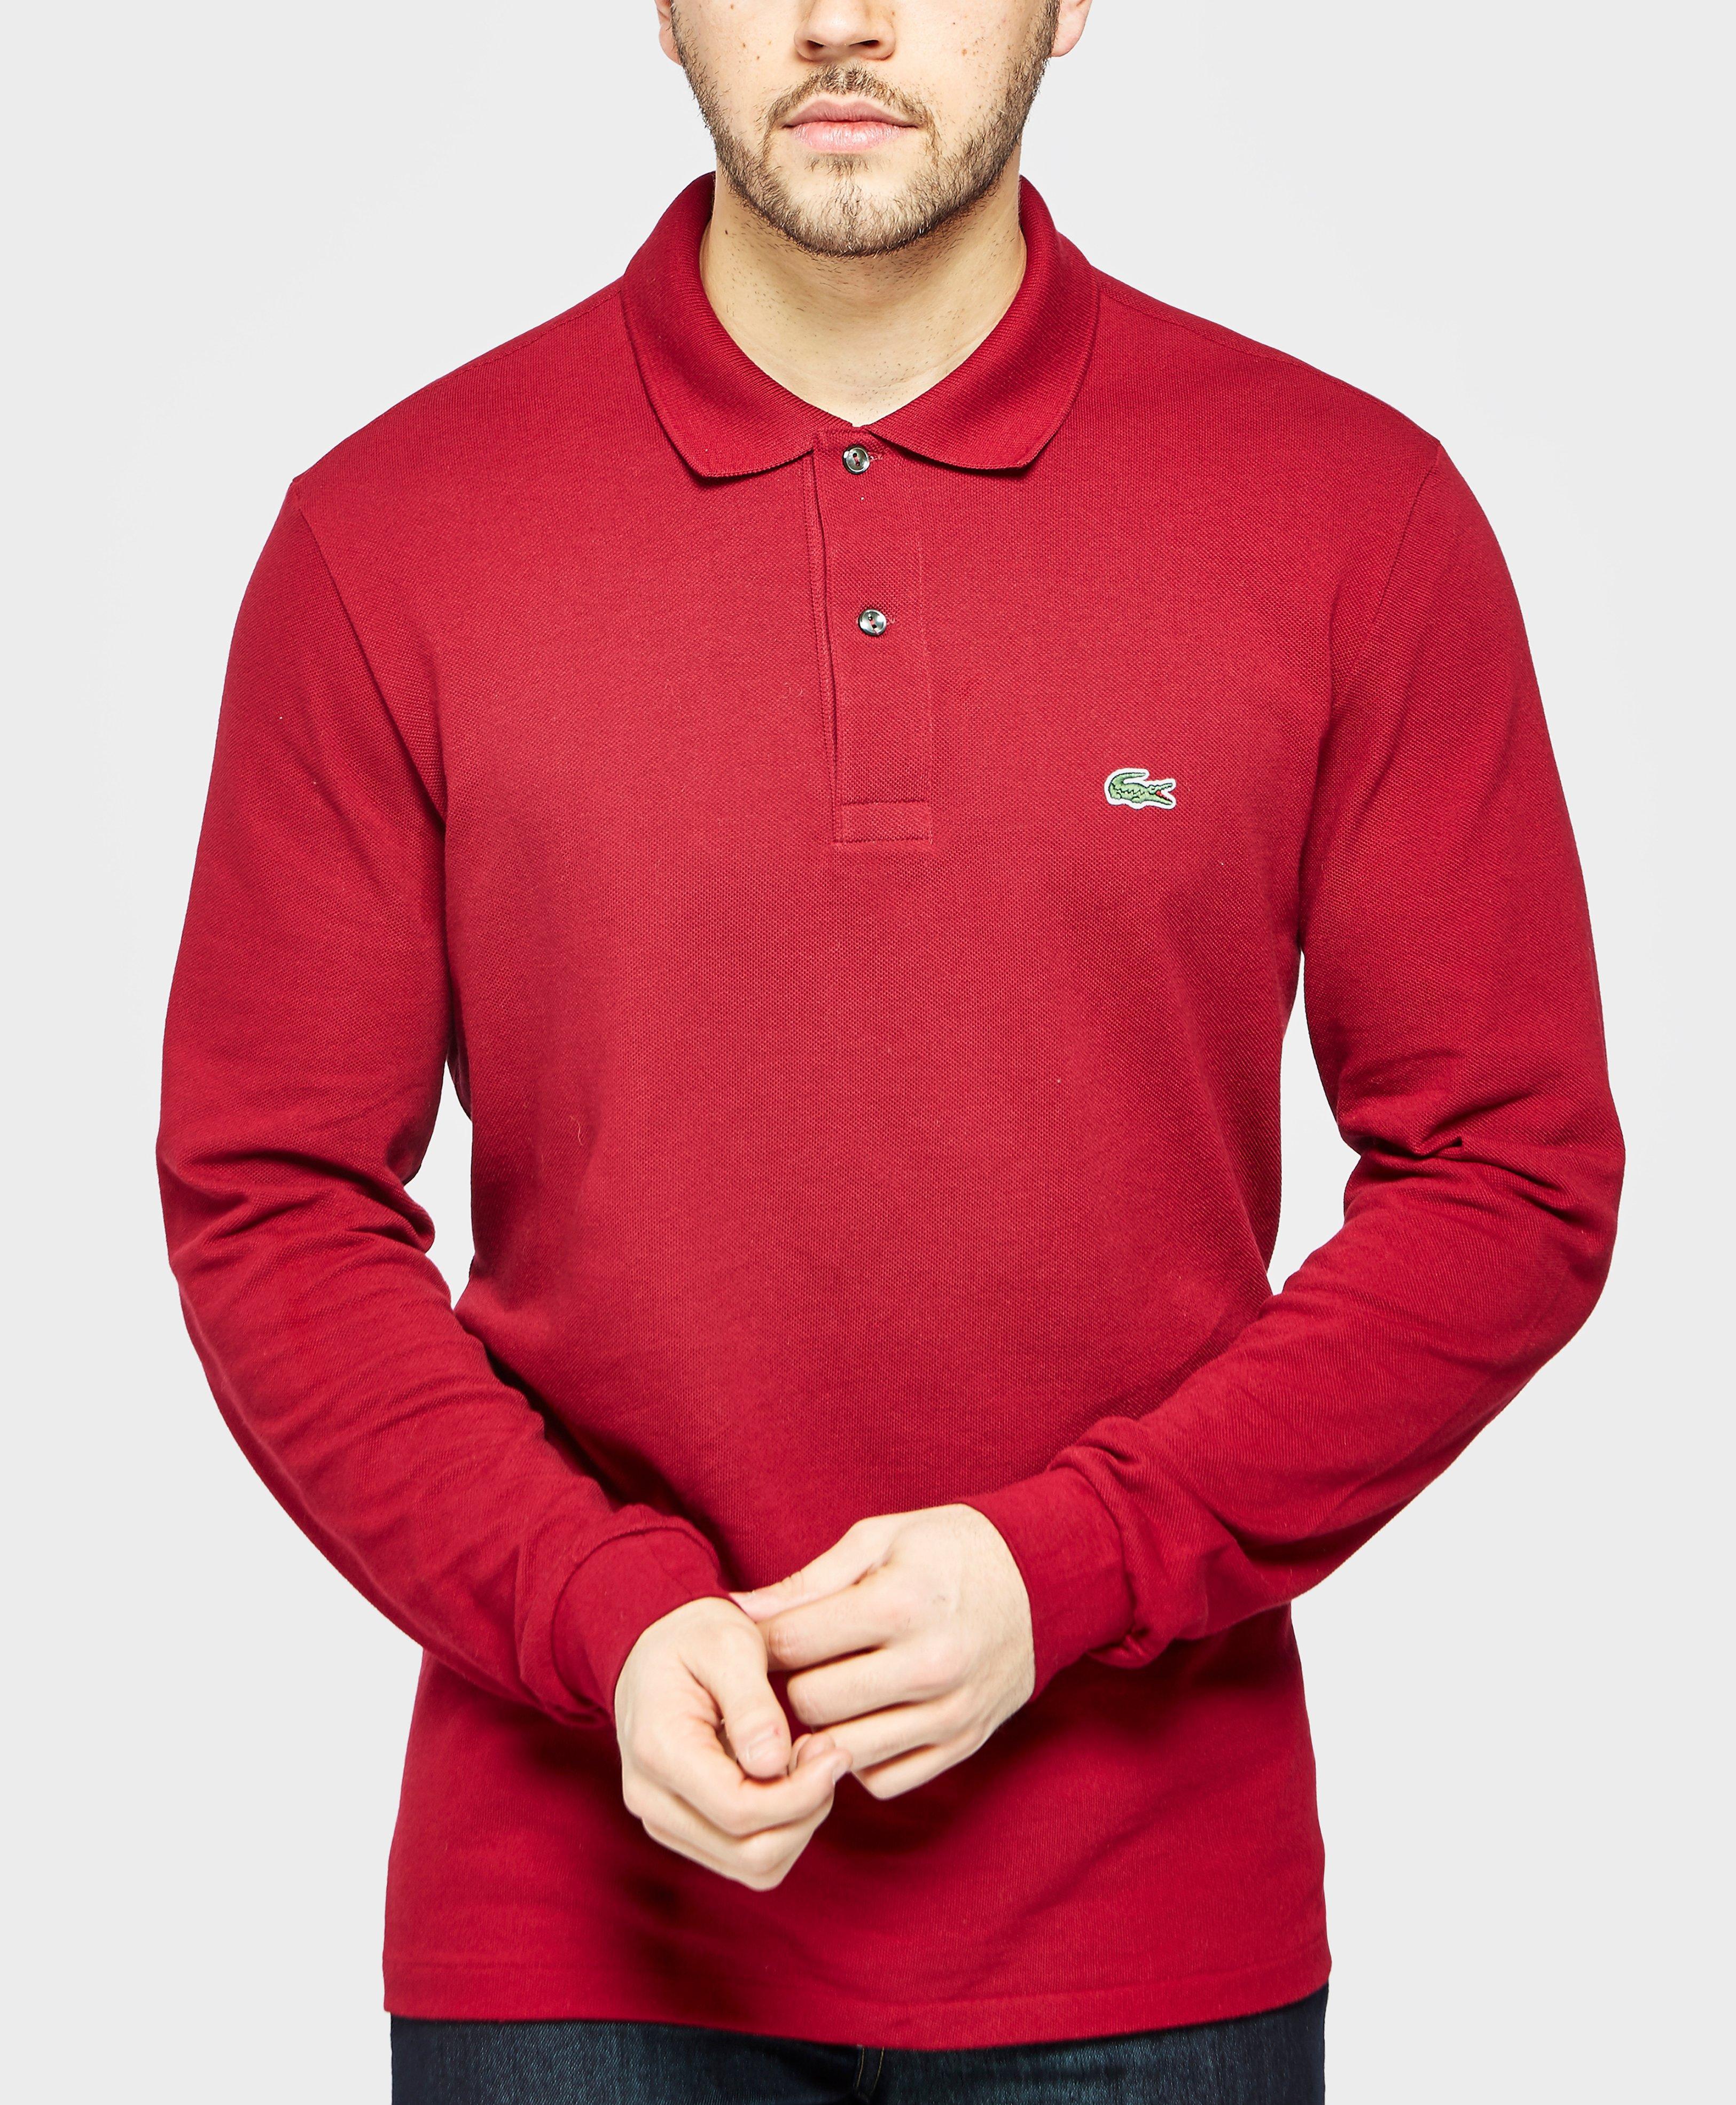 Lacoste Cotton Long Sleeve Polo Shirt in Red for Men - Lyst